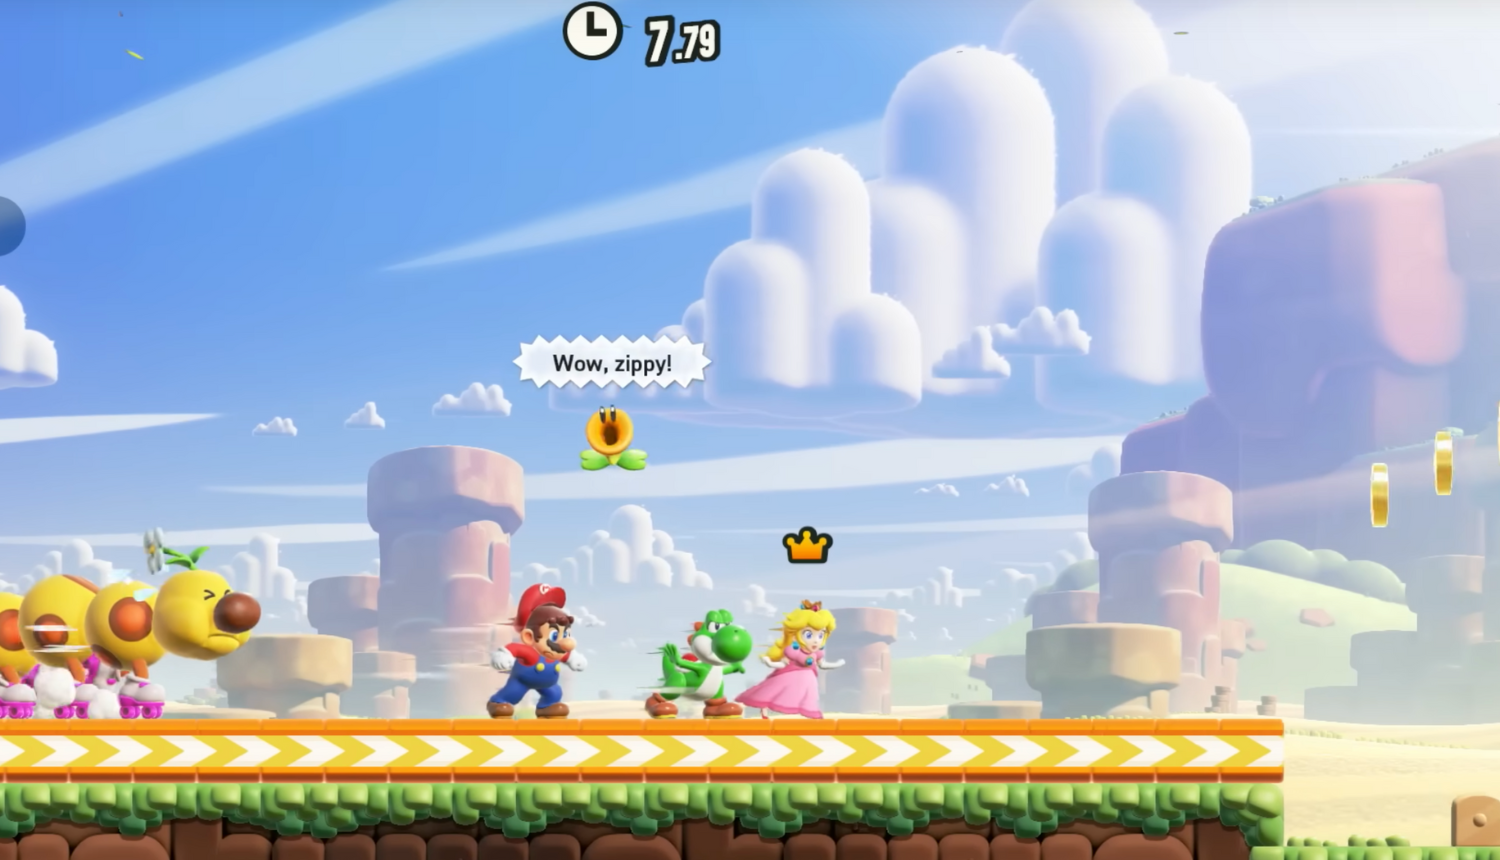 Super Mario Wonder Is a Wonderful Mess [Preview]